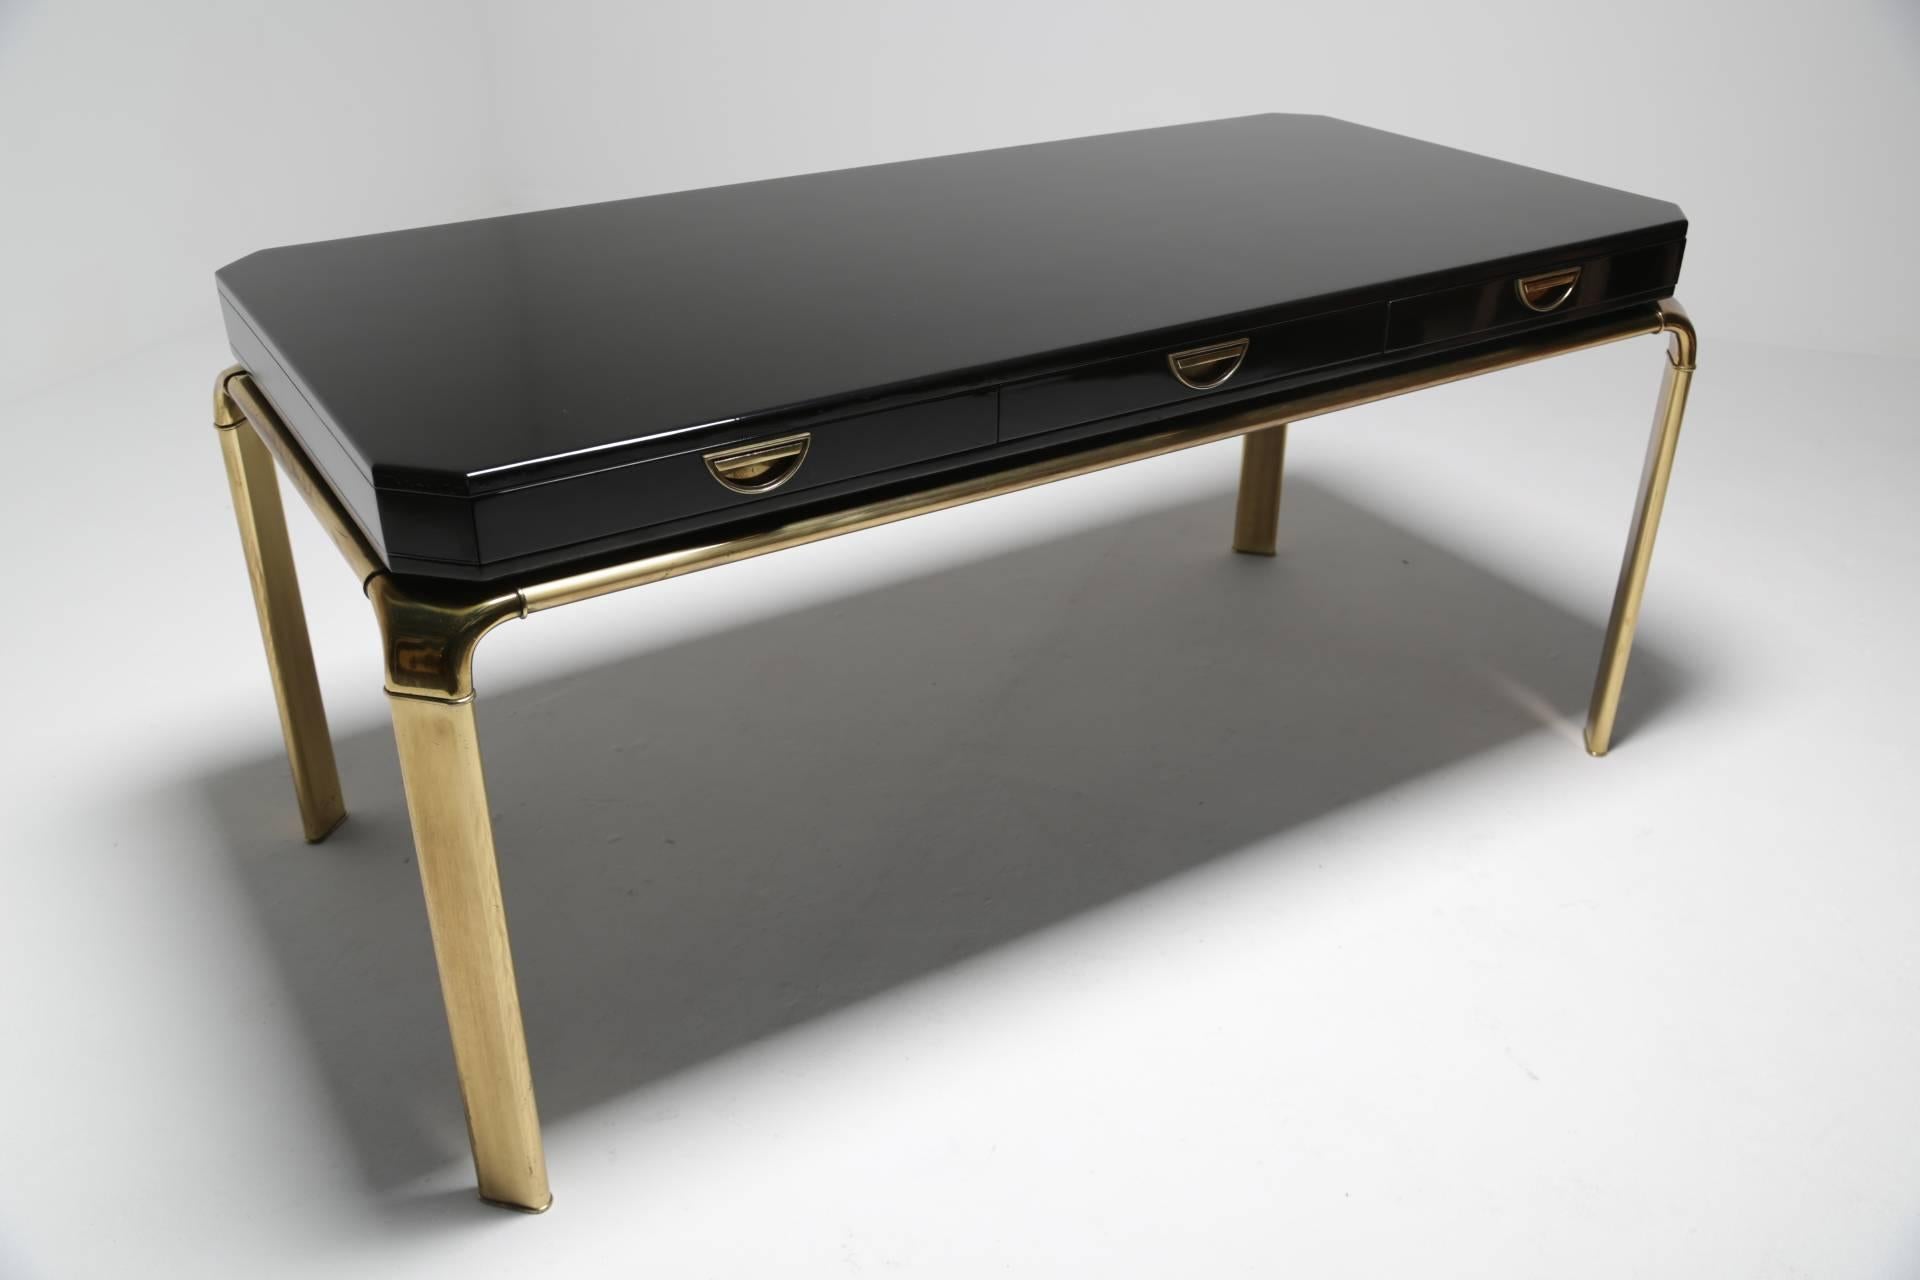 This is a luxe three-drawer desk by John Widdicomb Furniture Company and was made circa 1980. It is very much in the style of Hollywood Regency. A beautifully crafted brass frame and legs securely hold the black lacquer desk top. There are three